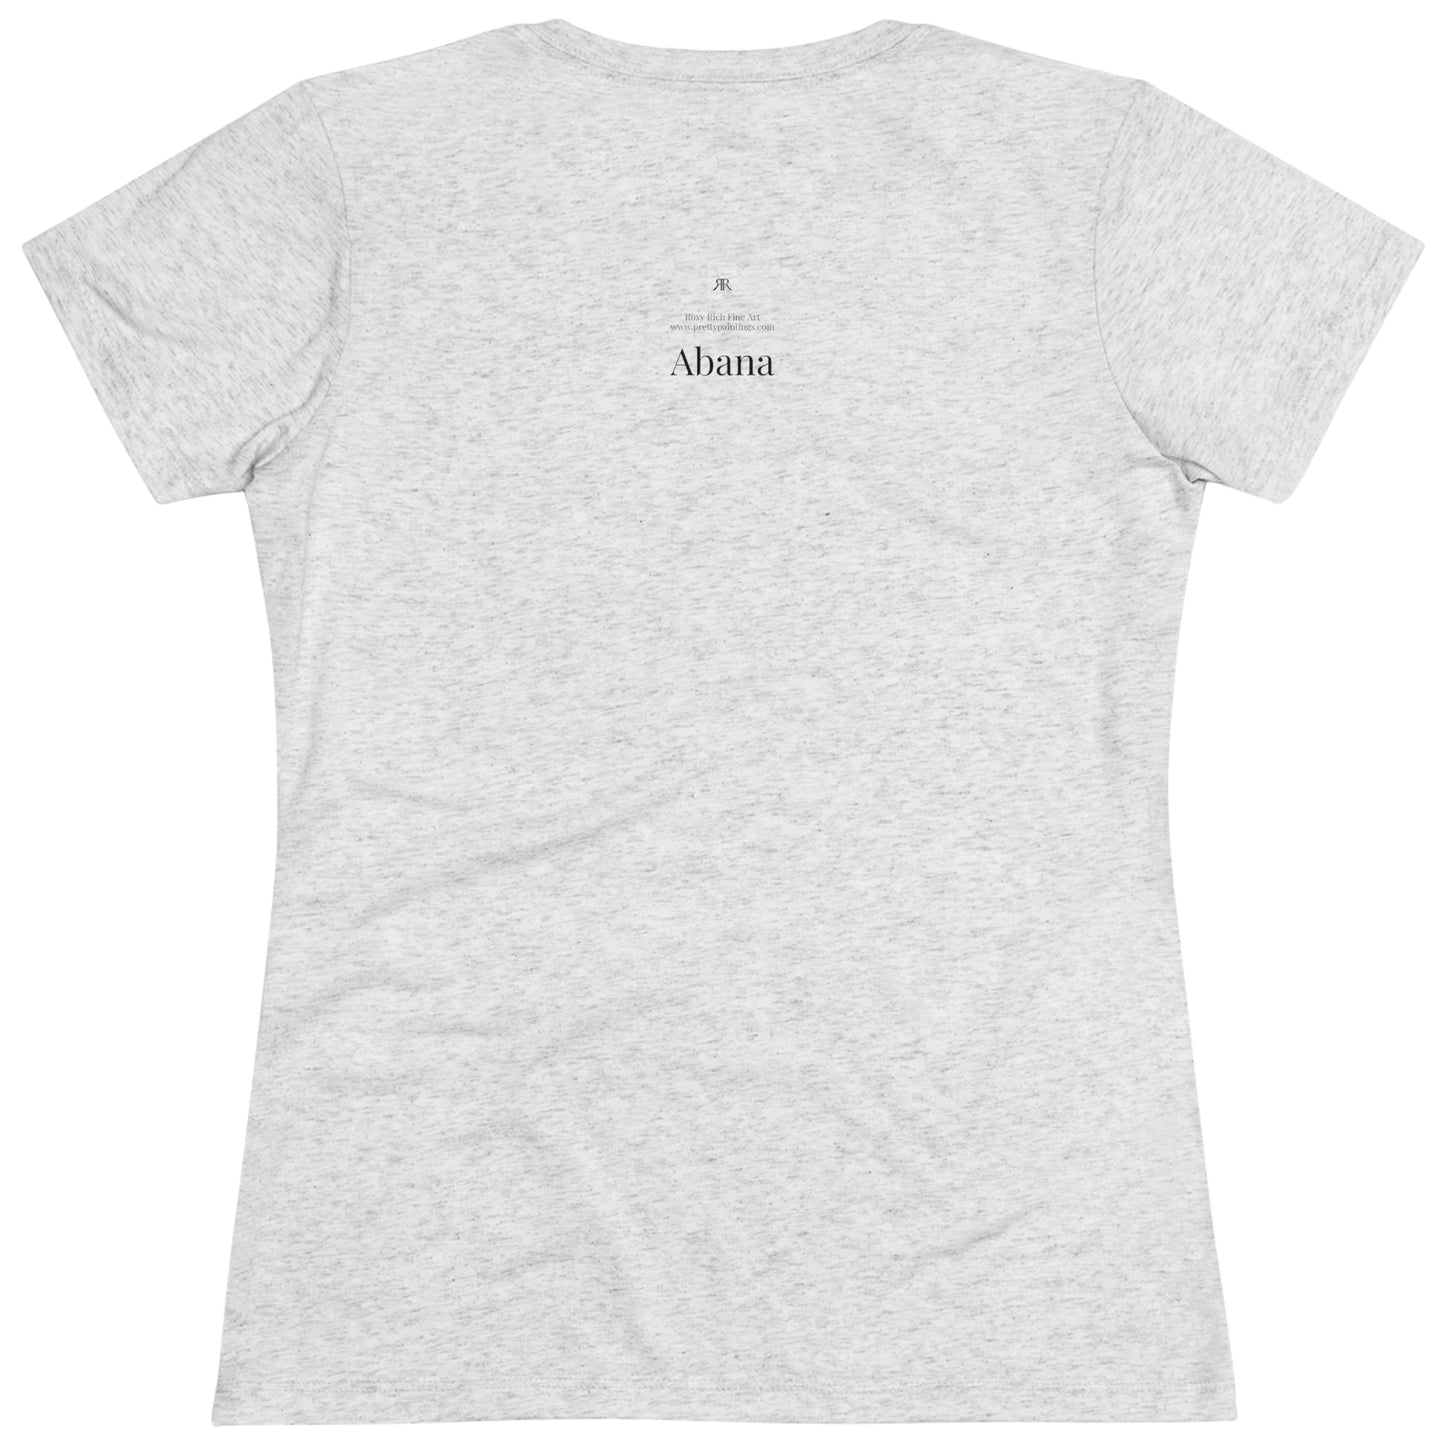 Abana (image on front) Women's fitted Triblend Tee  tee shirt